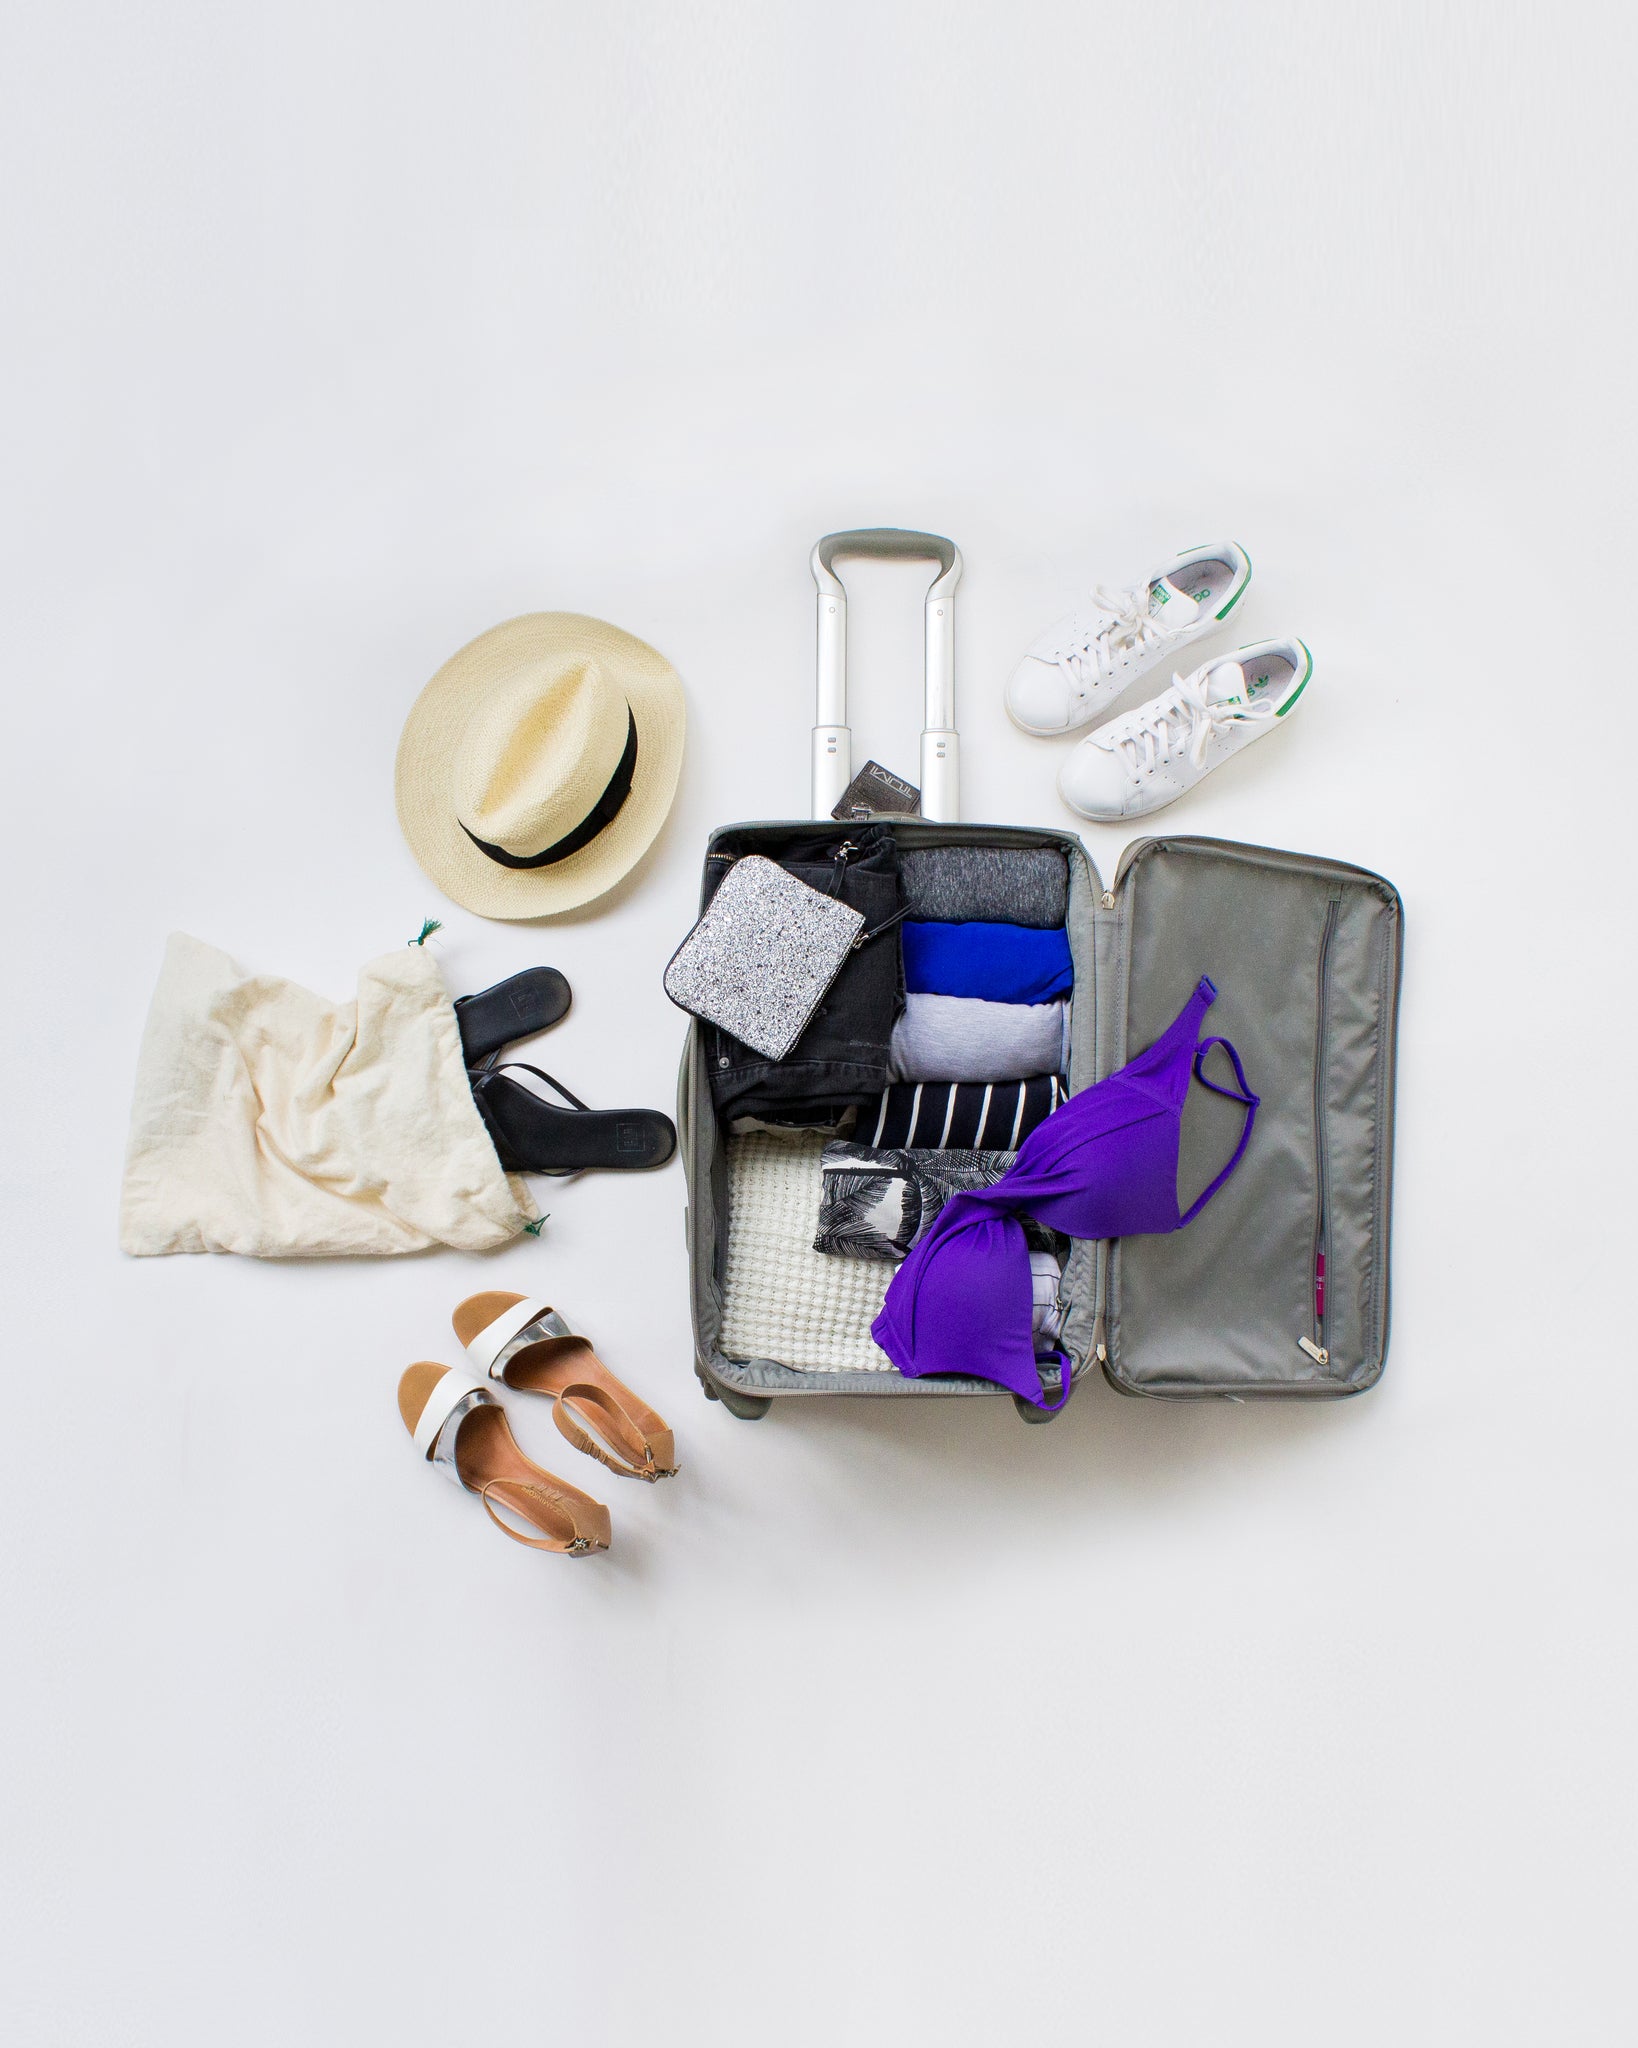 8 Period Purse Essentials to Pack for Traveling On Your Menstrual Cycle —  hey ShannonAshley